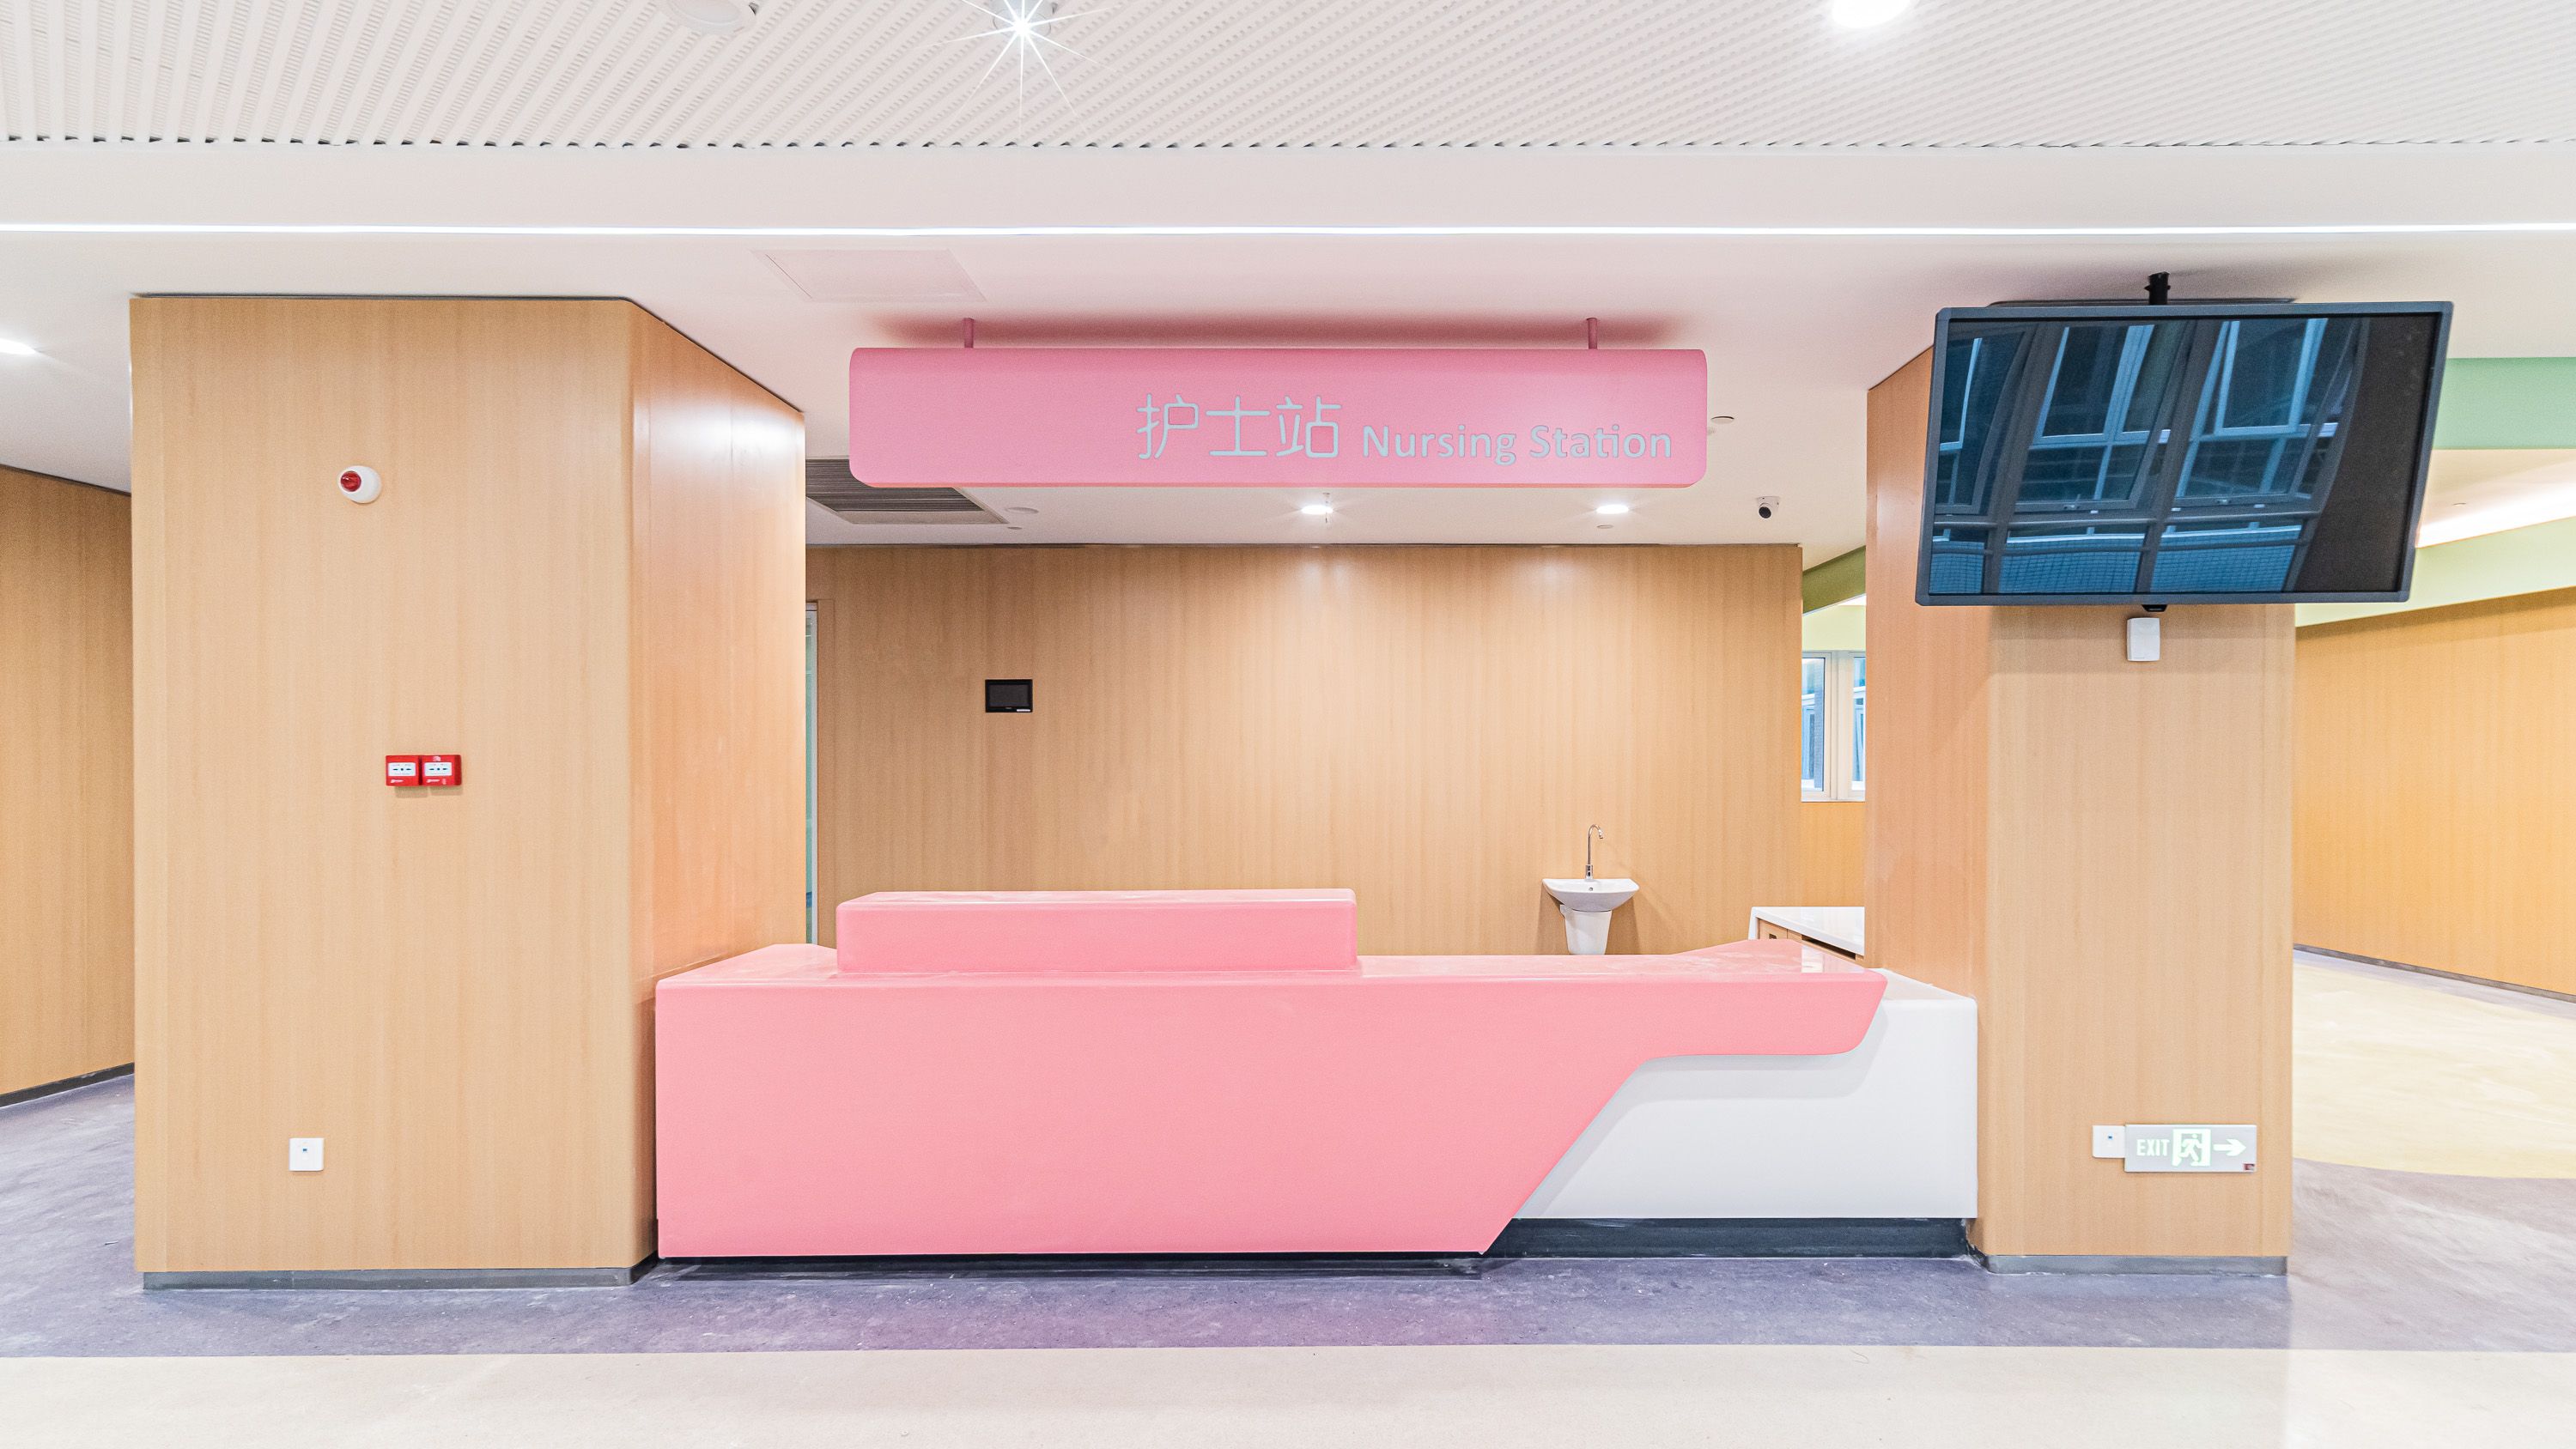 The Nursing station of Guangzhou Women and Children's Medical Center